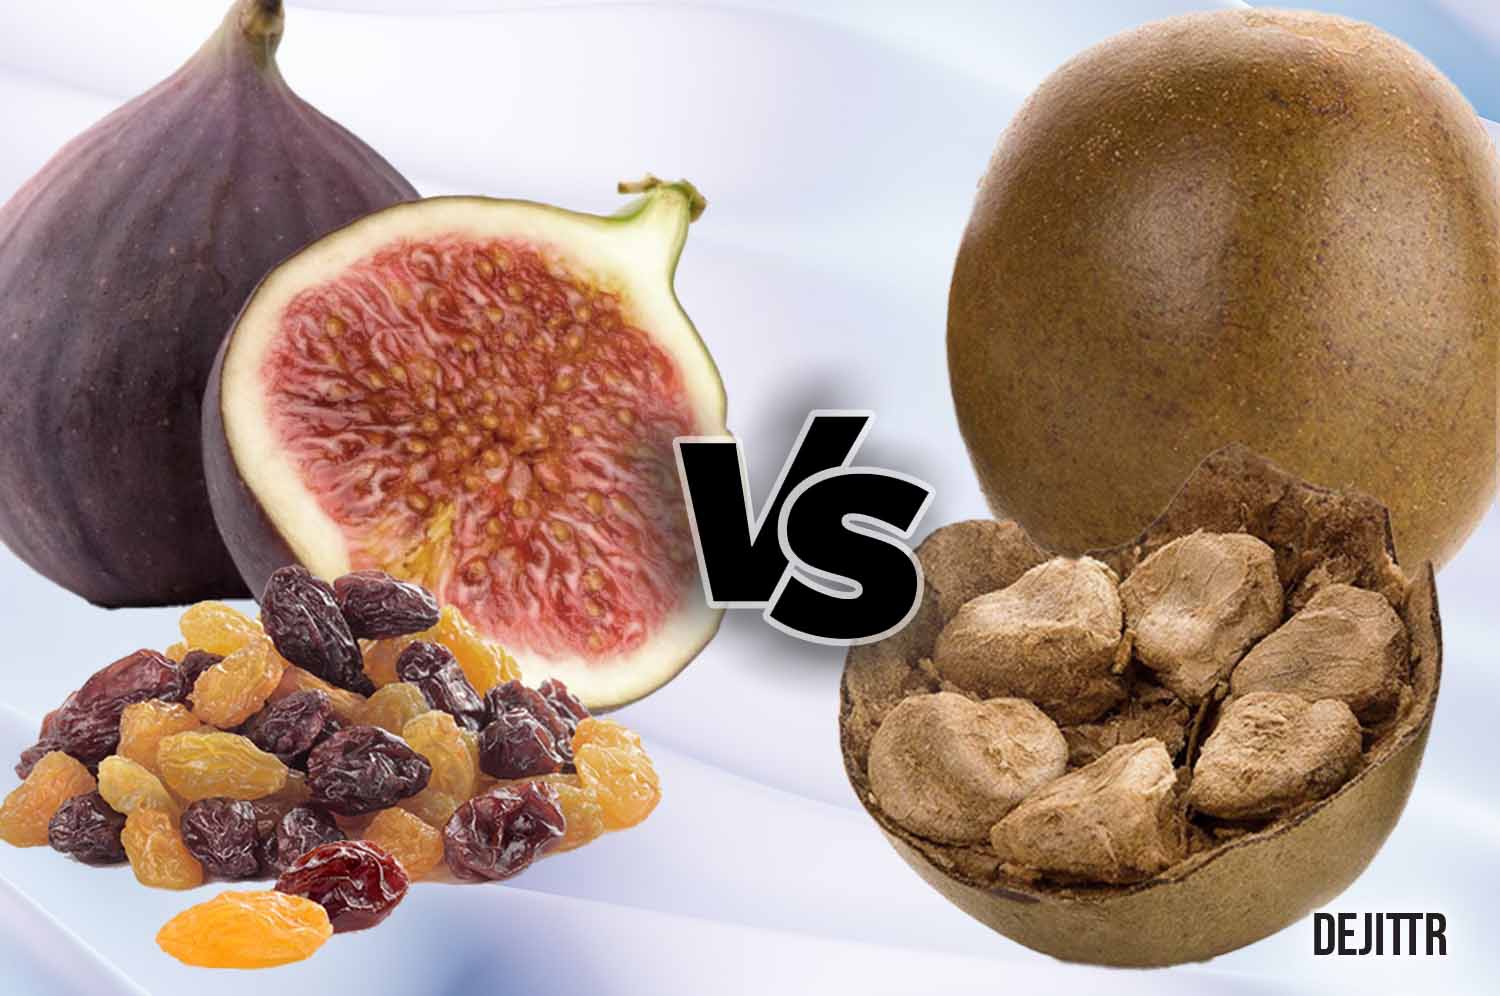 Picture of figs and raisins vs monk fruit on a blue and white background